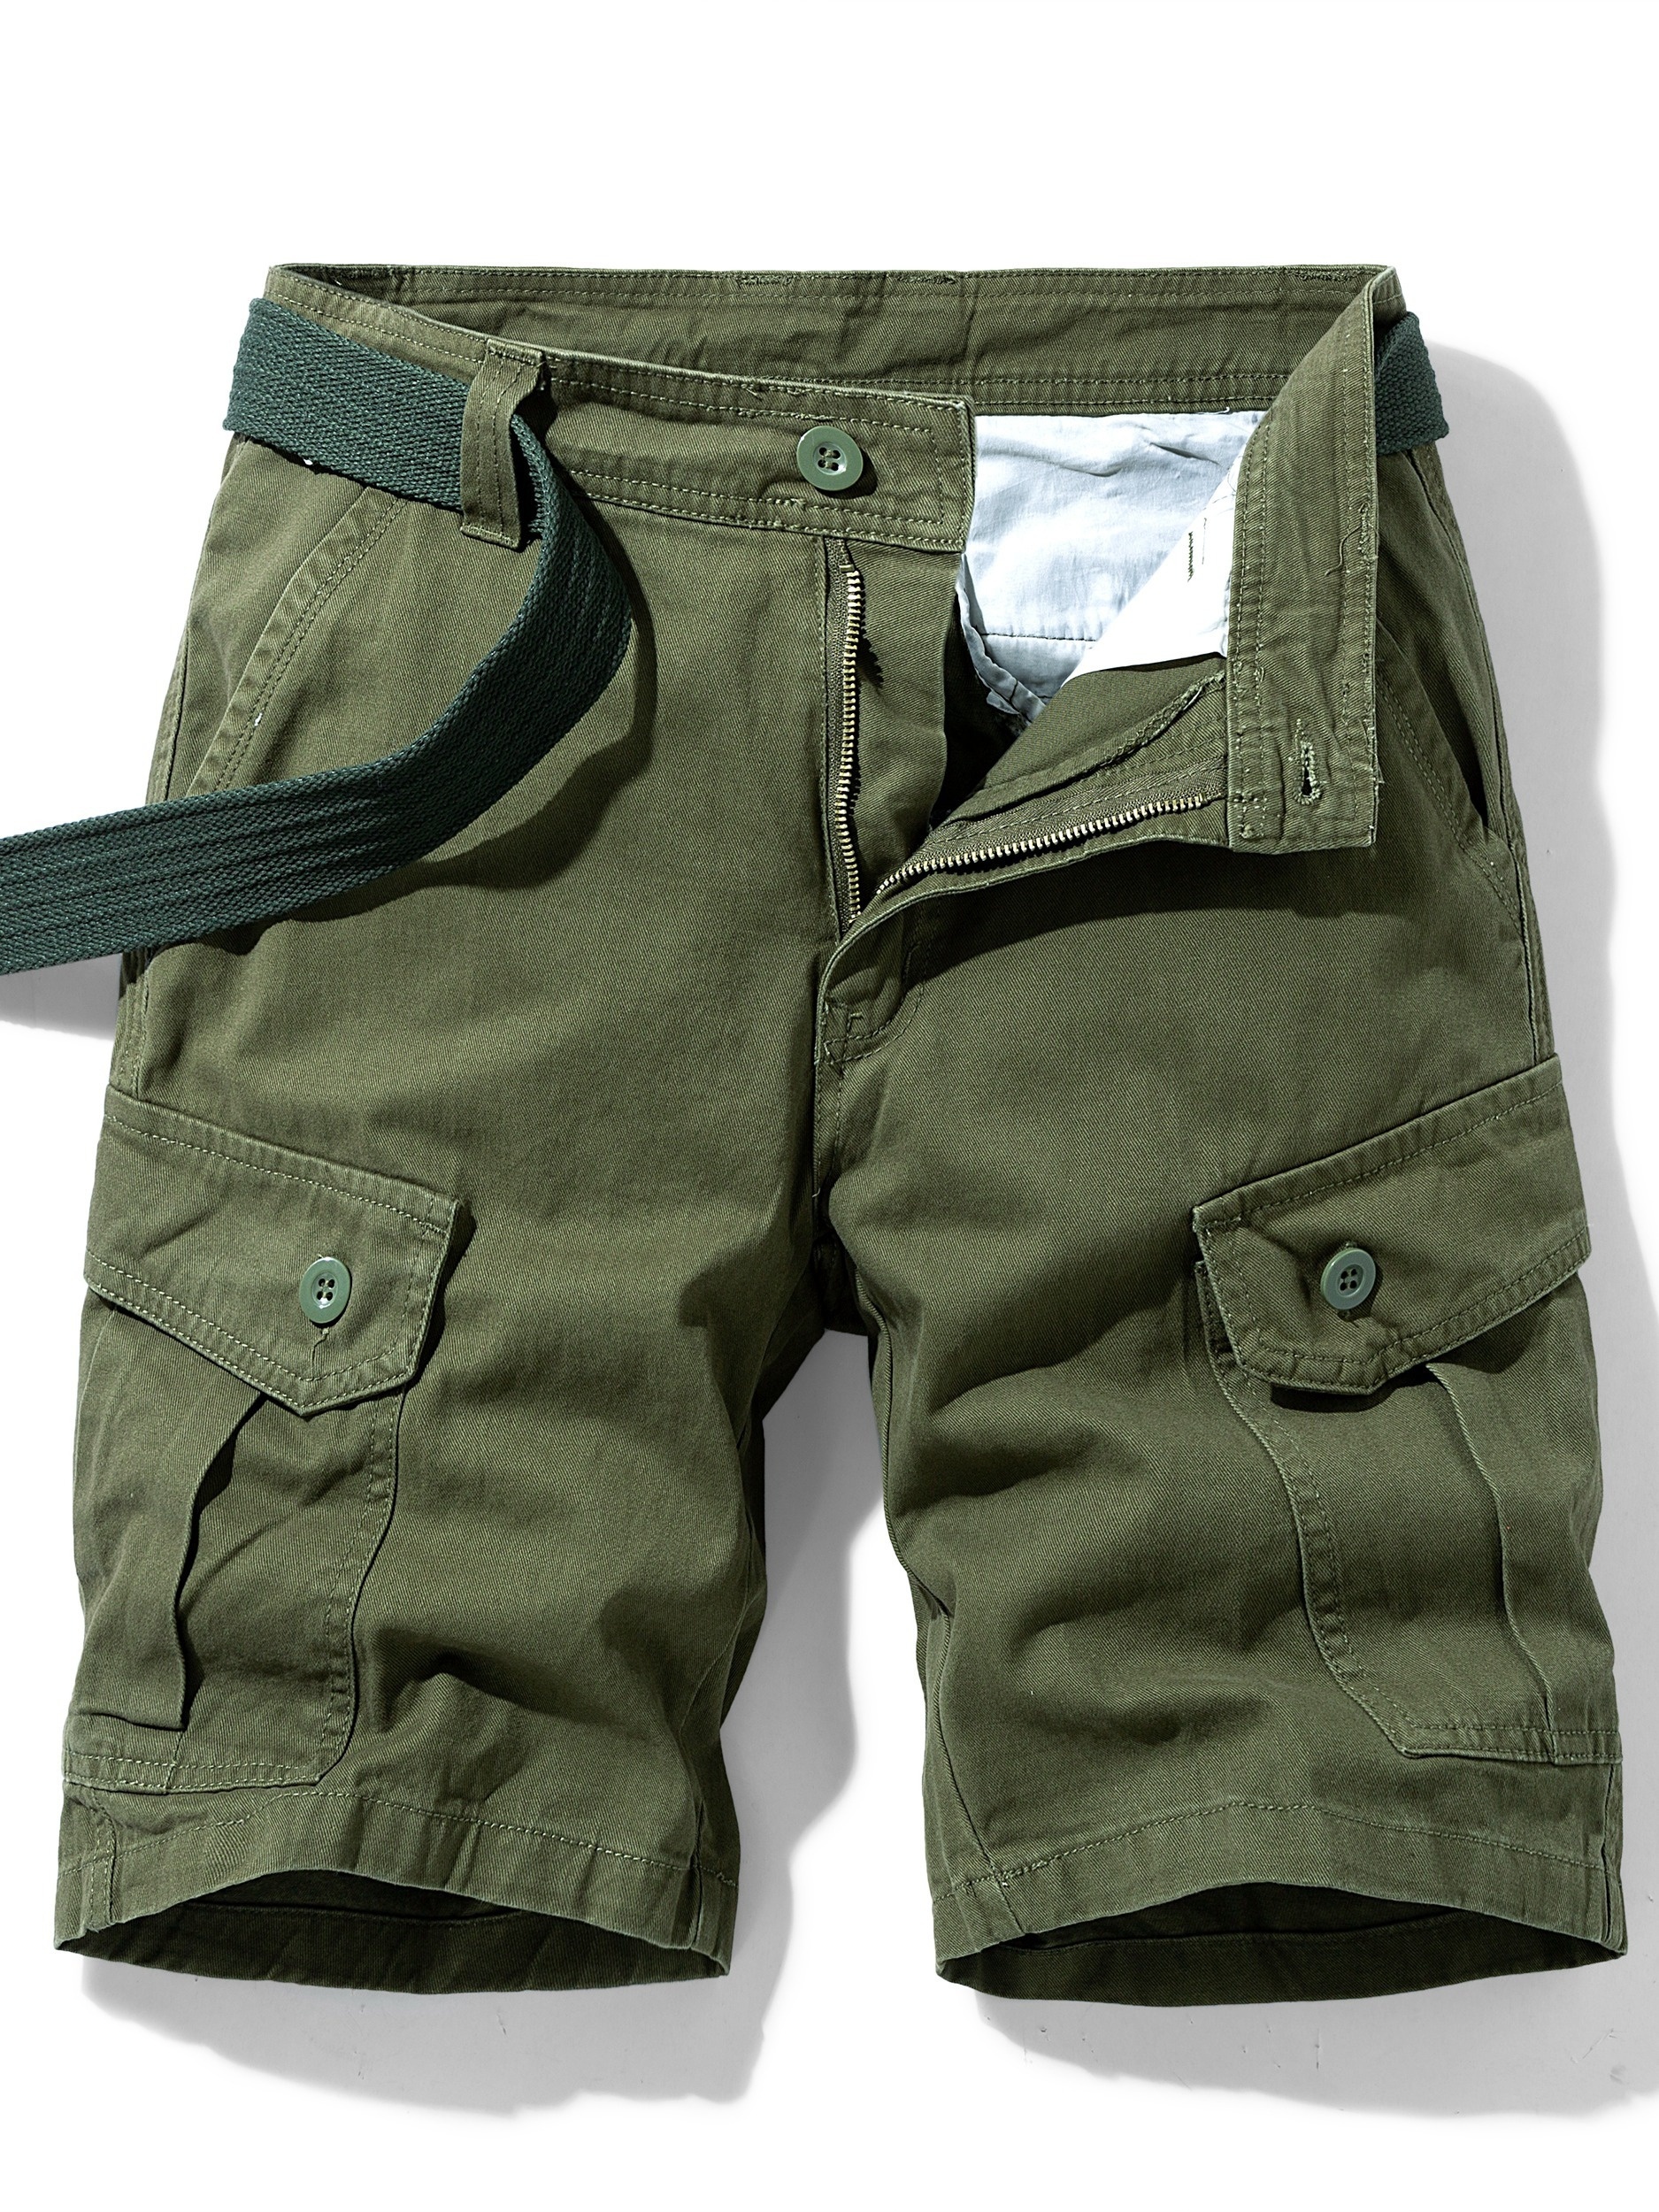 Men's Casual Multi Pocket Cargo Shorts, Chic Comfy Cotton Shorts For Outdoor Hiking (Without Belt)